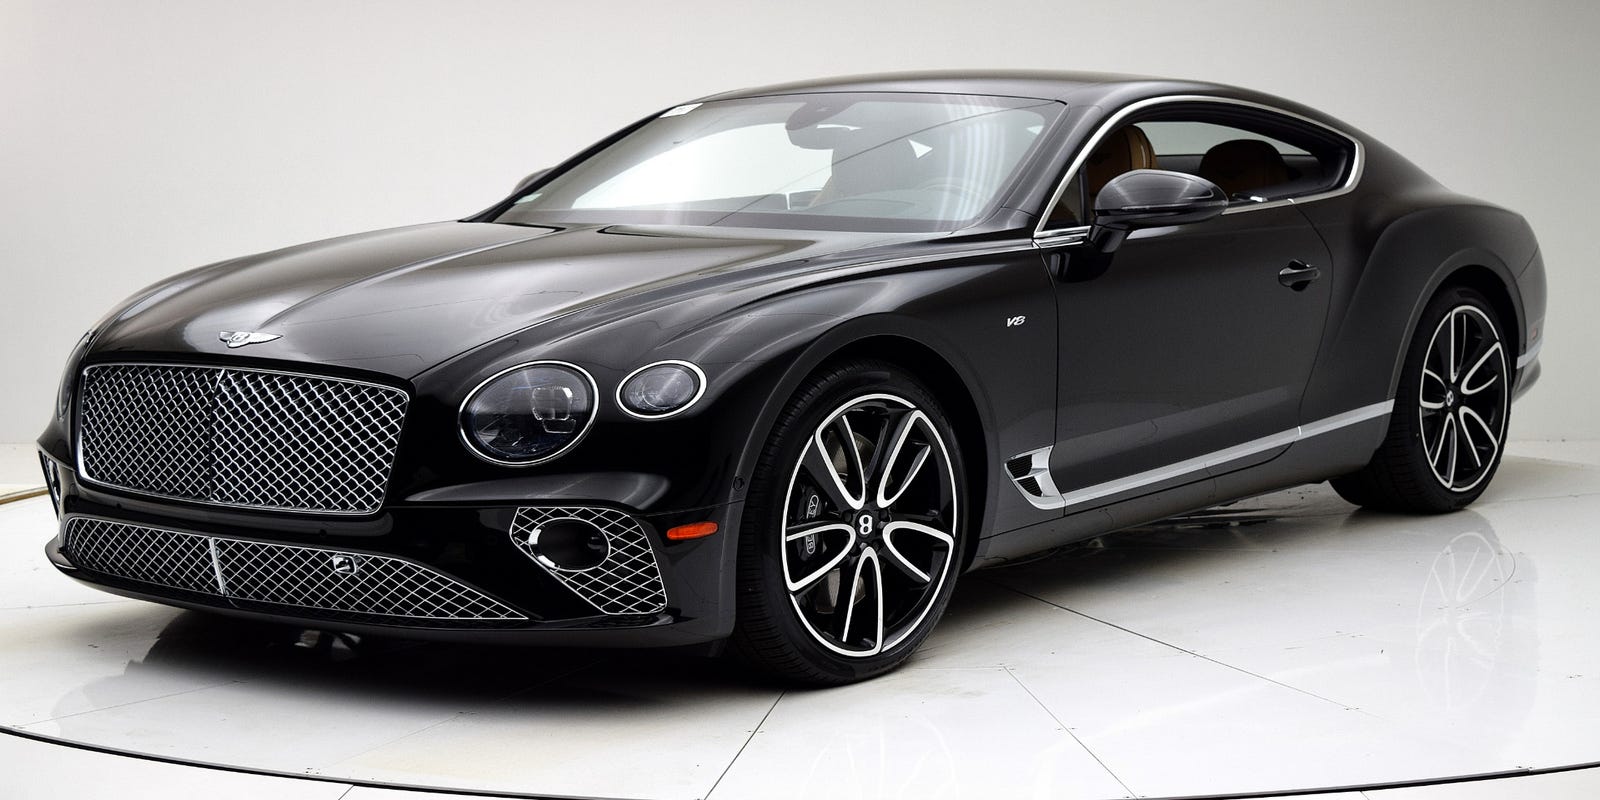 2020 Bentley Continental GT sport coupe